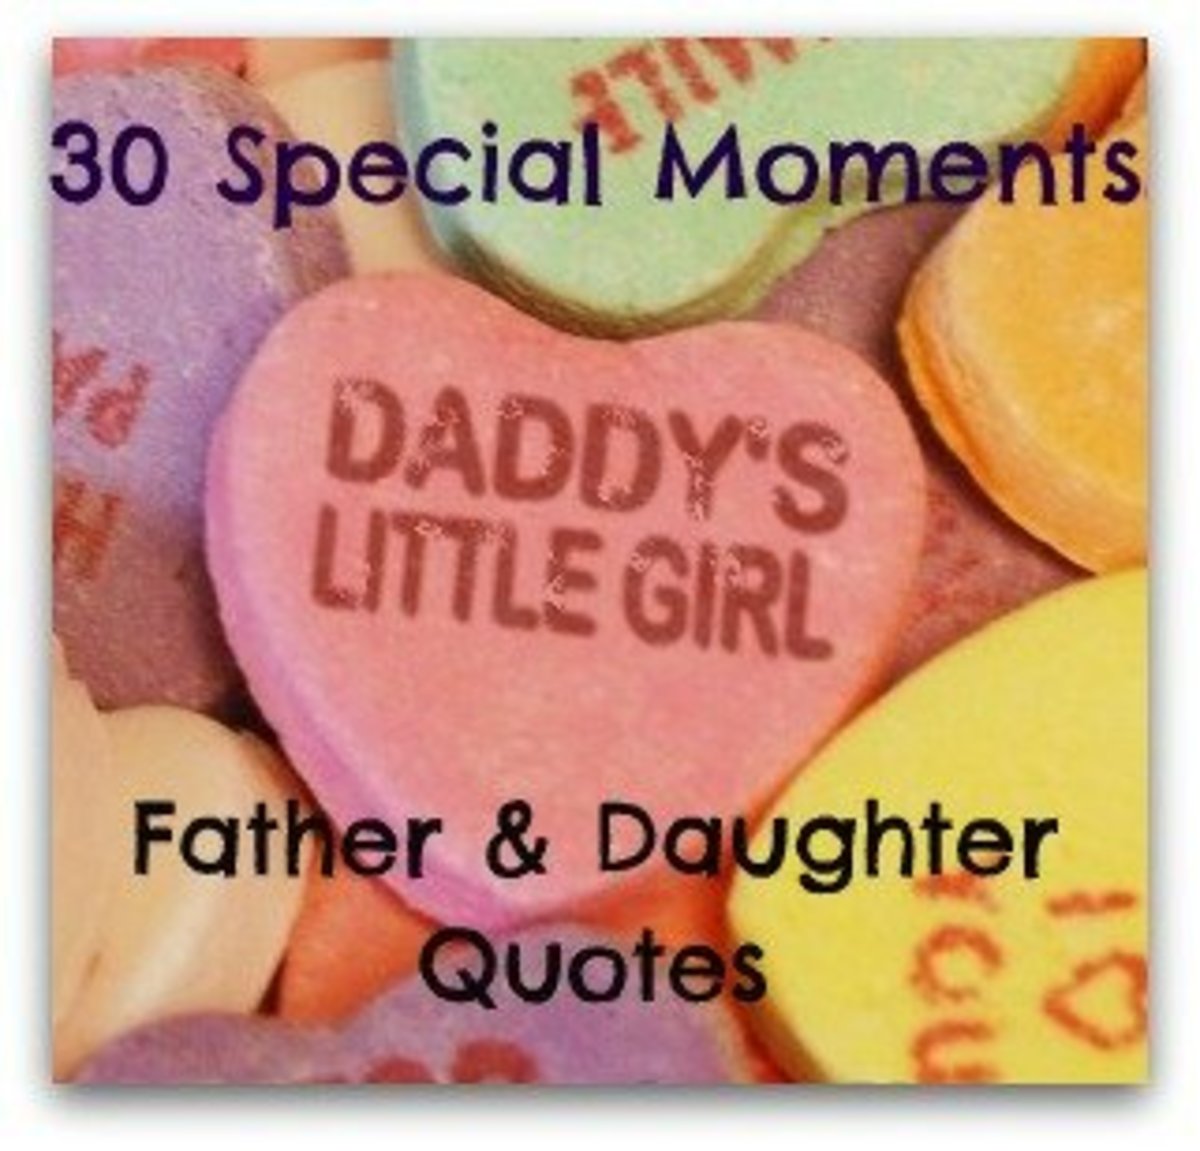 Father Daughter Advice Daddy S Little Girl Bonding Moments Wehavekids